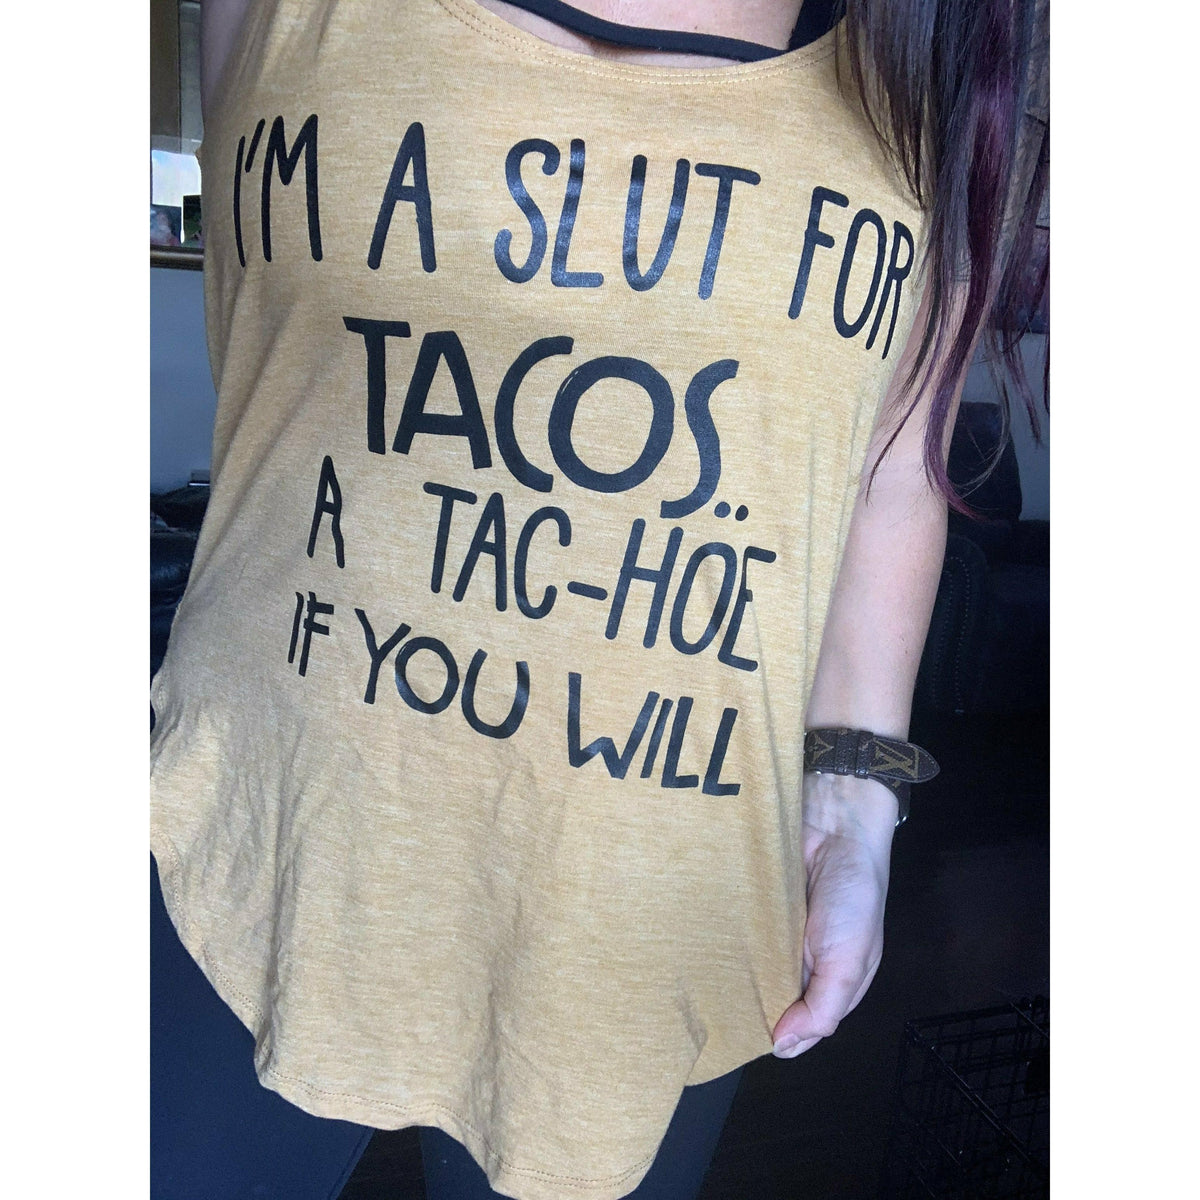 Tachoe if you will Festival Tank or Tee